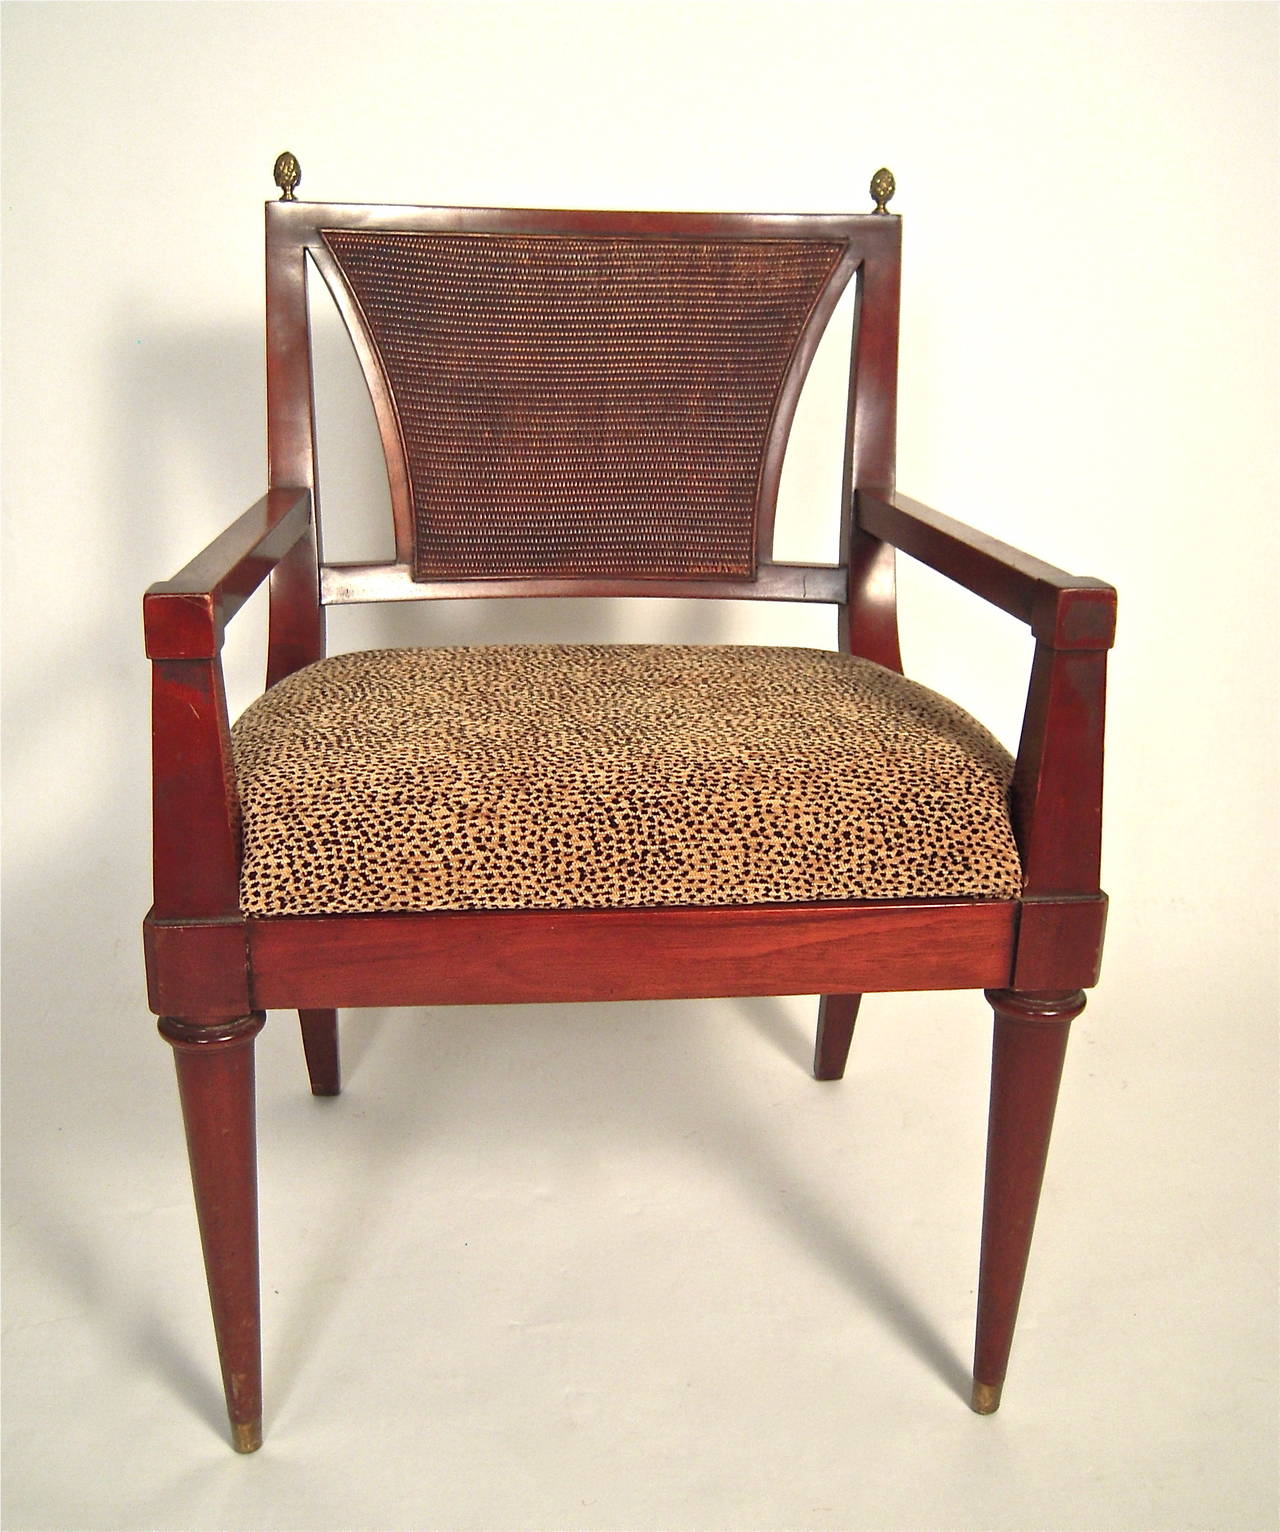 American Mid-Century Neoclassical Style Caned Armchair with Pineapple Finials